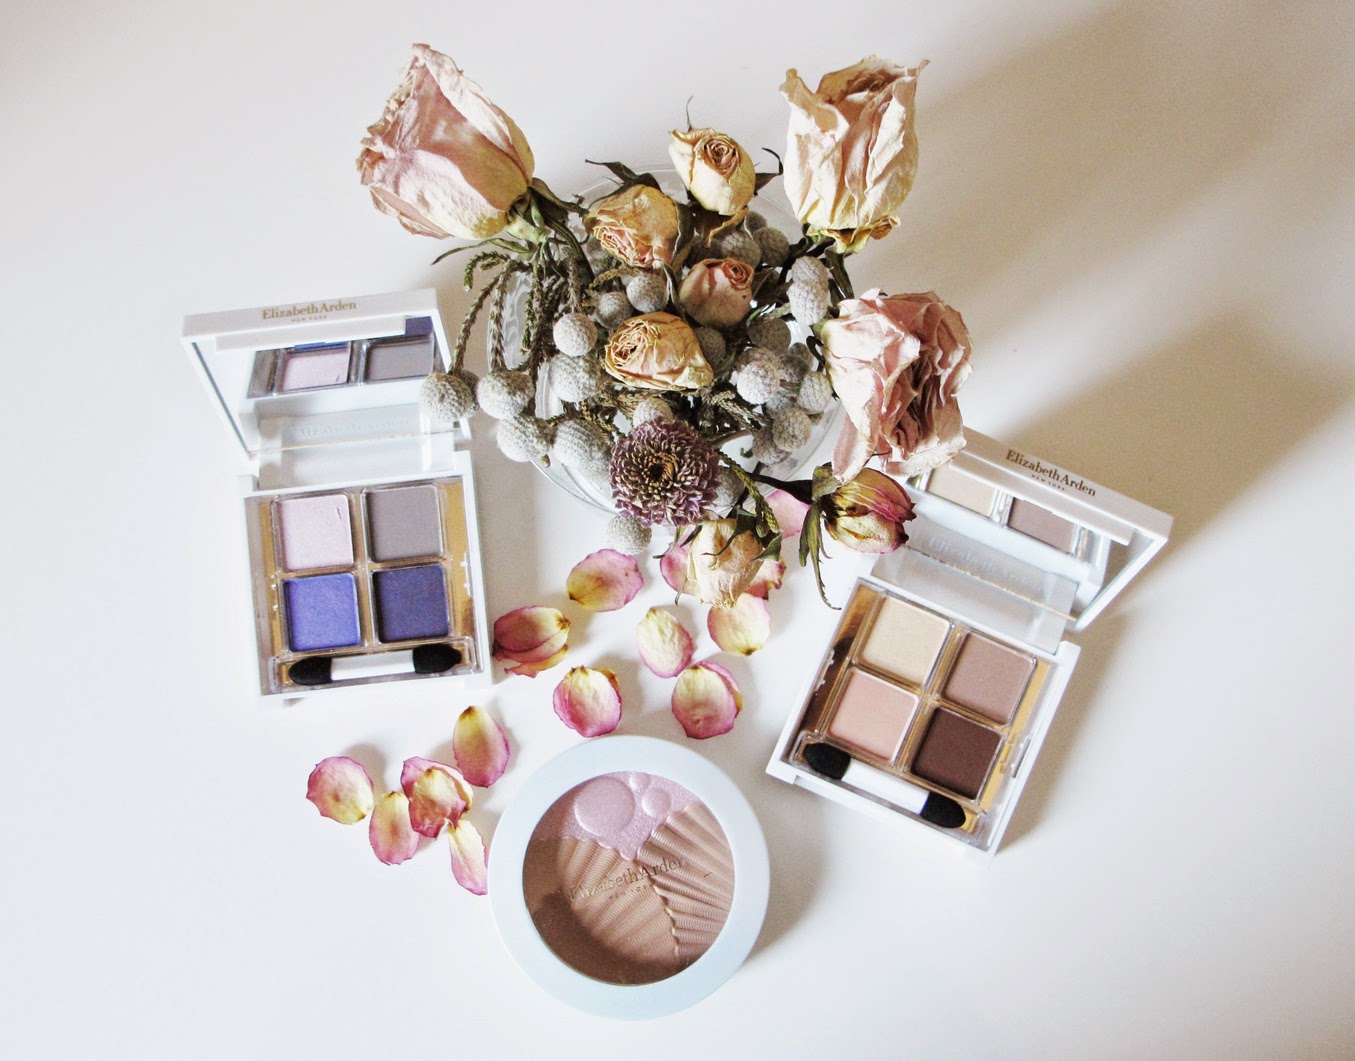  Sunkissed Pearls Color Collection Elizabeth Arden